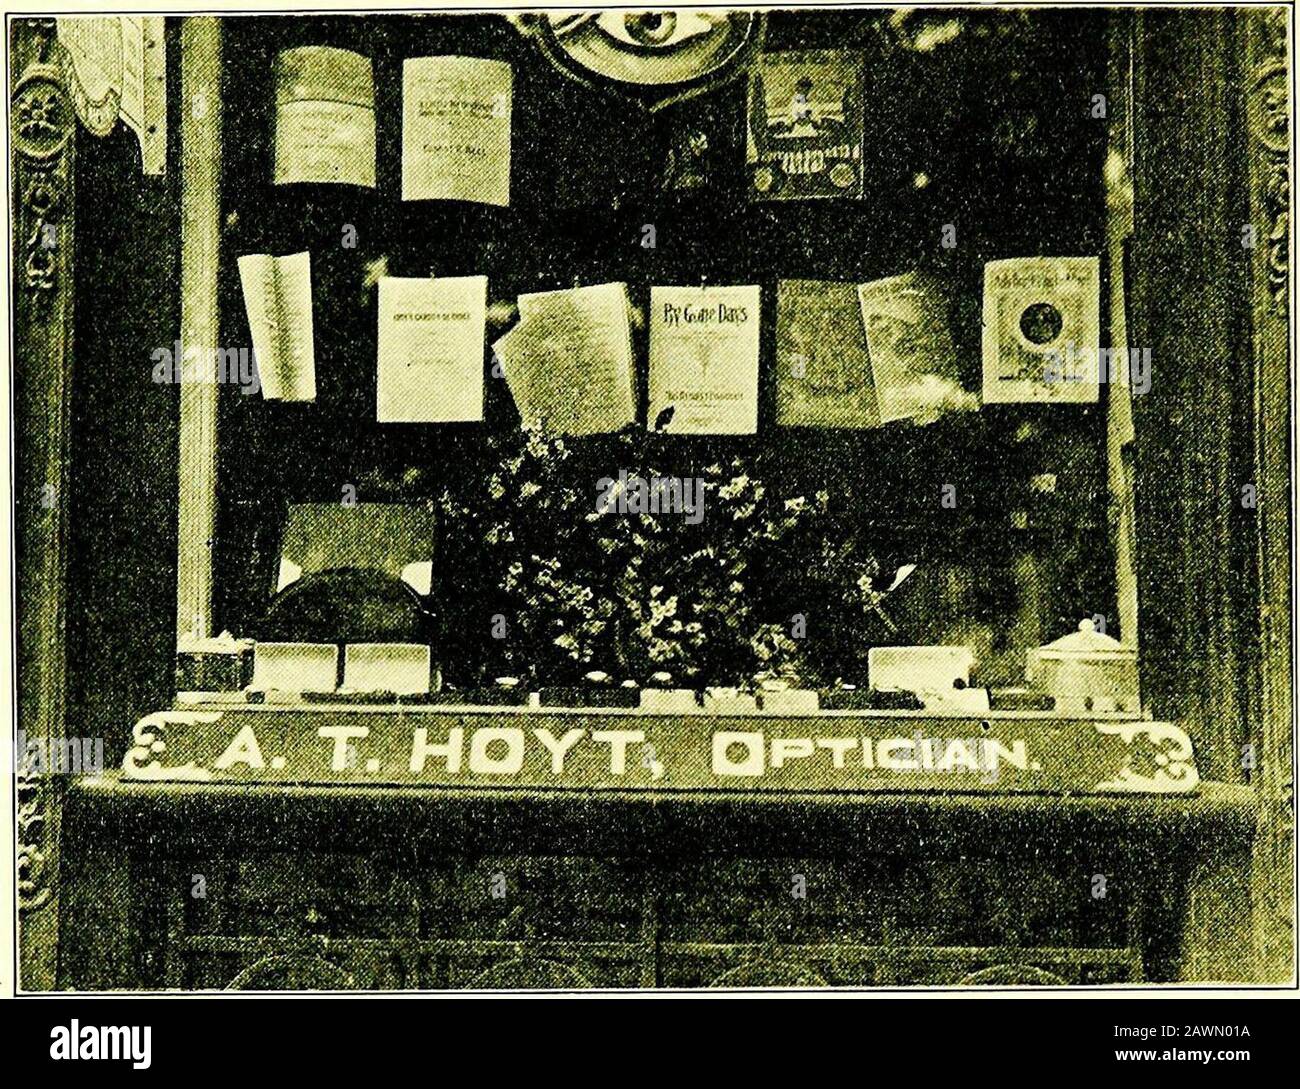 General impressions of the country merchant . ore s^ir^e -? - ?^^^^^^. A FINE SHOW WINDOW OF THE A. T. HOYT STORE, MORAVIA, N. Y. MORAVIA, a town of 1393 population, in Cayuga County, New York, has agood jewelry store, which does a thriving trade.Mr. A. T. Hoyt, the owner, who has been in business for 14 years, saysthat practically all their trade is with farmers. Advertised goods are thebest sellers—well sell anything for which there is a call. Farmers offer a good marketfor gold watches, and the South Bend Watch, which has been advertised in farm papers,is a good seller. Since I have had the Stock Photo